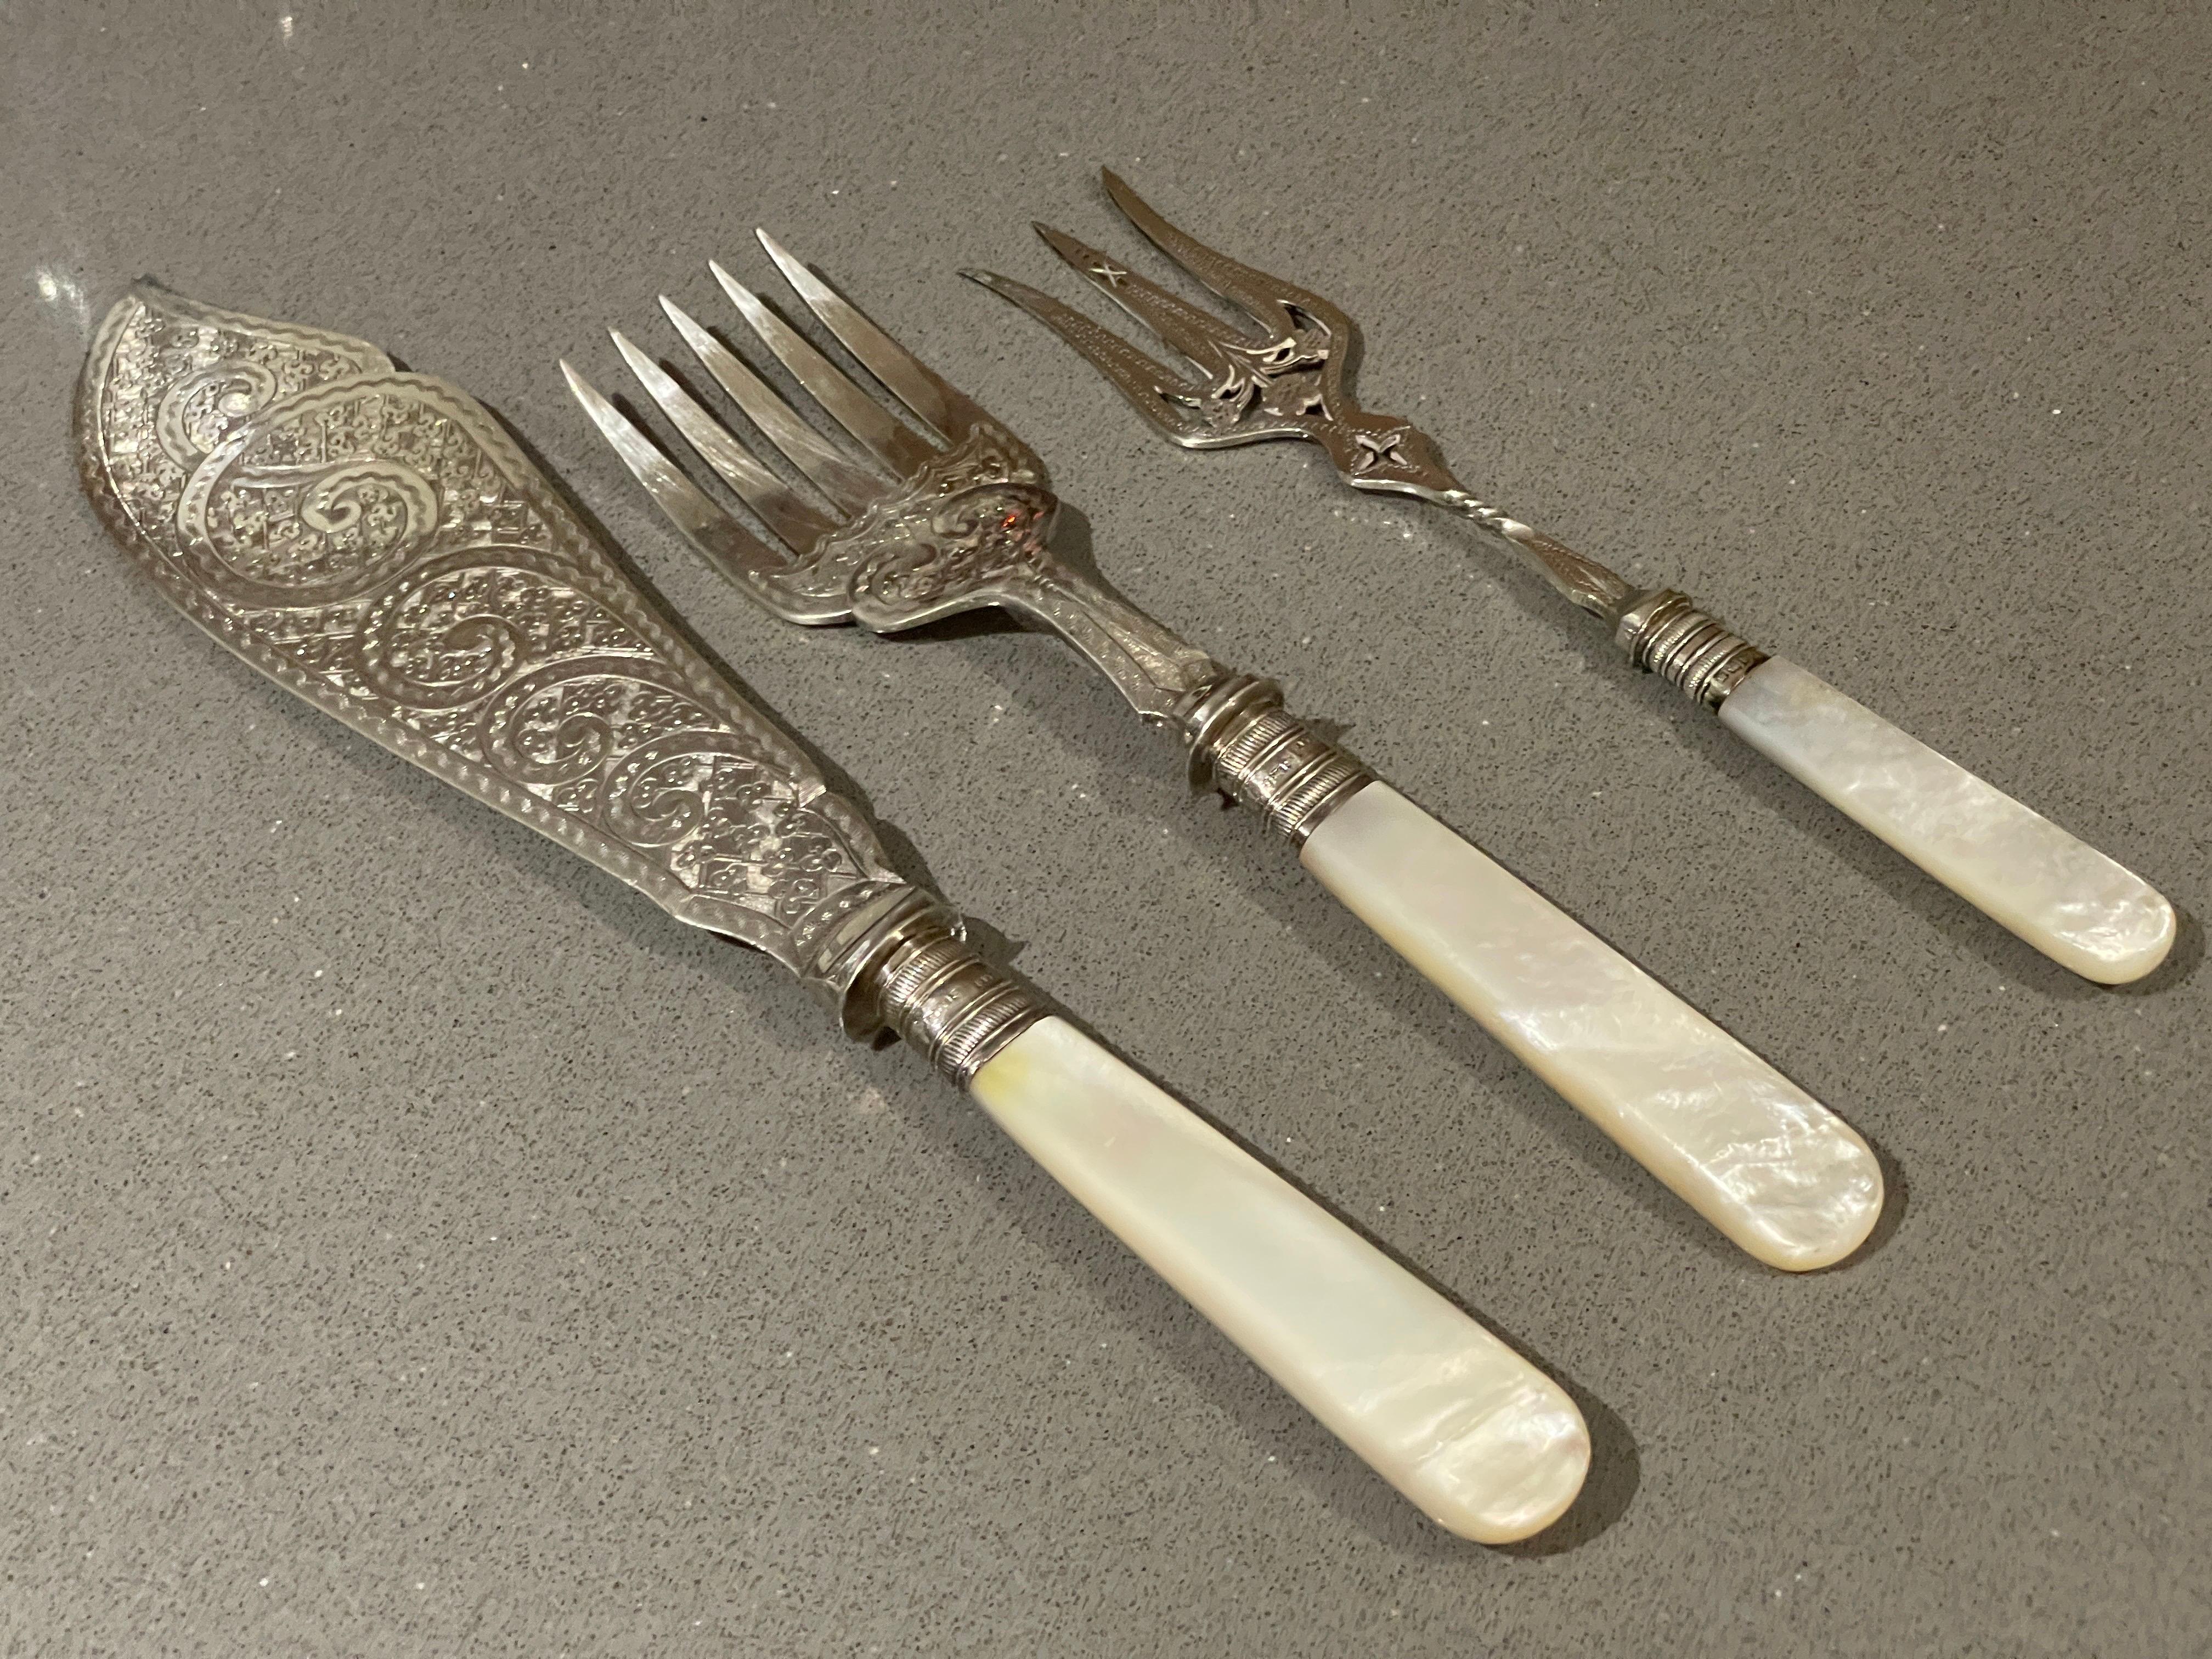 Sterling Silver Carving Set 3 Mother pearl handles, Cutlery, Knife Fork Sheffield with engraved floral pattern
An excellent quality sterling silver and mother-of-pearl fish server or carving set of 3.
Made and retailed By Garrard's of